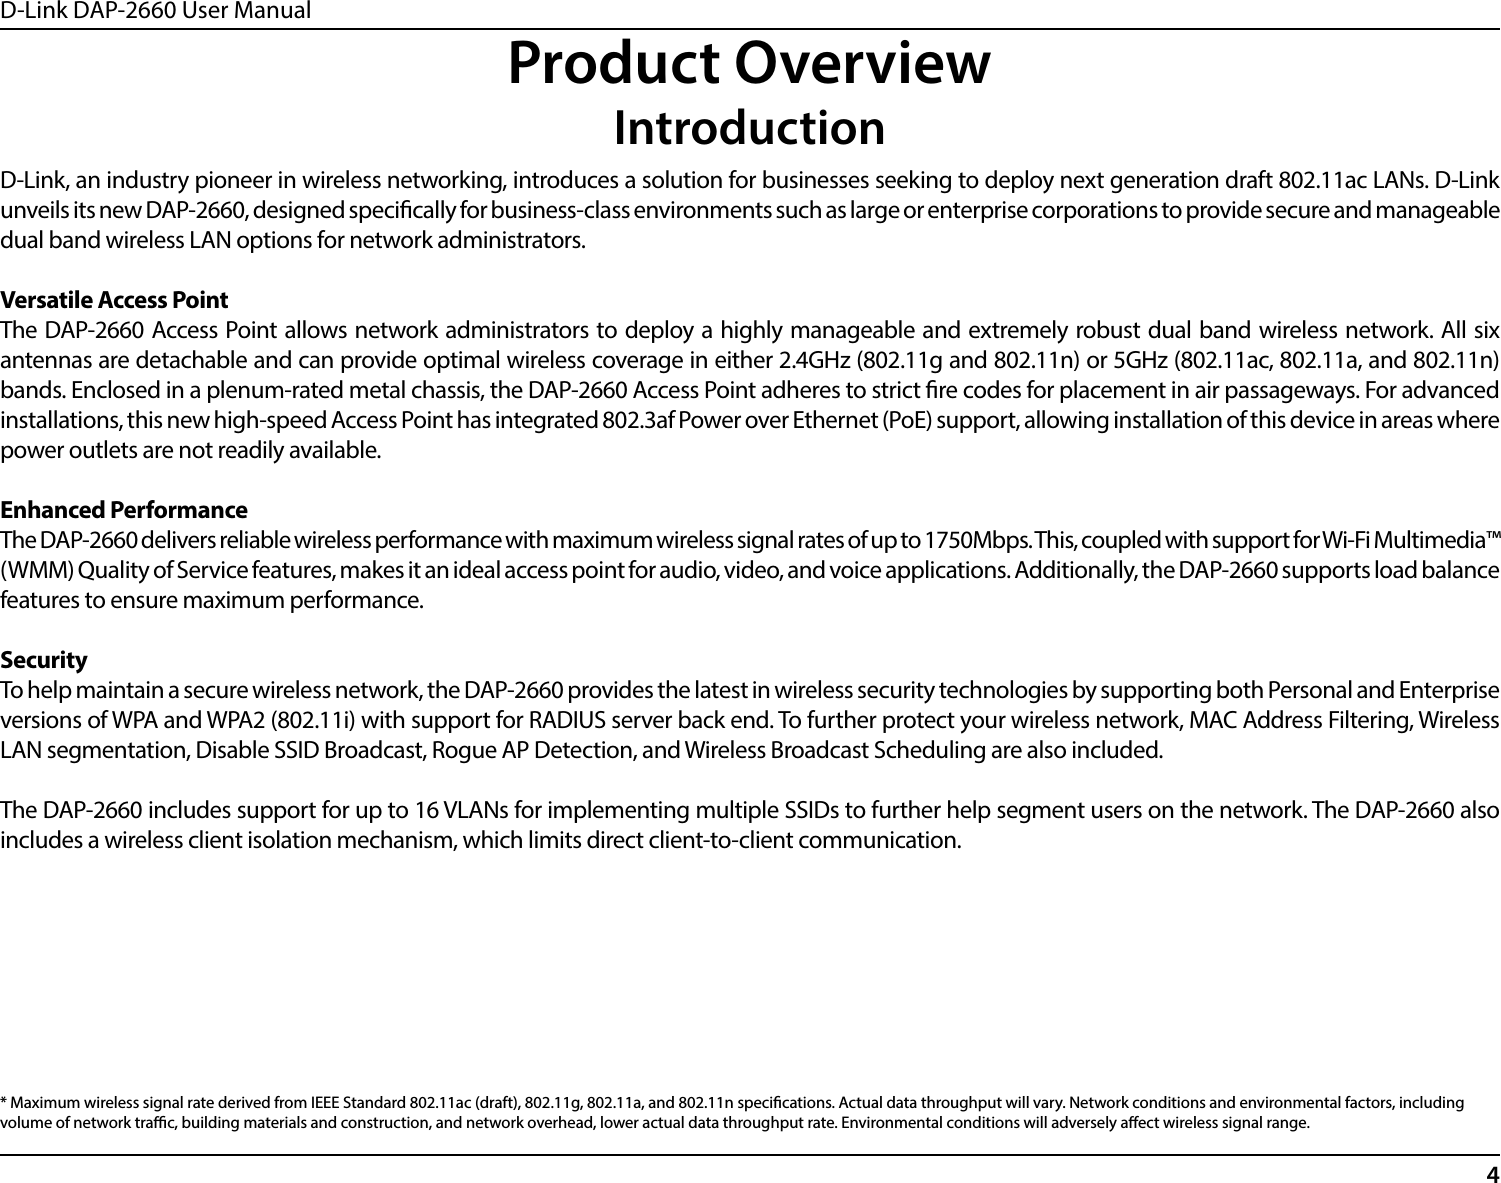 D-Link DAP-2660 User Manual4Product OverviewIntroductionD-Link, an industry pioneer in wireless networking, introduces a solution for businesses seeking to deploy next generation draft 802.11ac LANs. D-Link unveils its new DAP-2660, designed specically for business-class environments such as large or enterprise corporations to provide secure and manageable dual band wireless LAN options for network administrators.Versatile Access PointThe DAP-2660 Access Point allows network administrators to deploy a highly manageable and extremely robust dual band wireless network. All six antennas are detachable and can provide optimal wireless coverage in either 2.4GHz (802.11g and 802.11n) or 5GHz (802.11ac, 802.11a, and 802.11n) bands. Enclosed in a plenum-rated metal chassis, the DAP-2660 Access Point adheres to strict re codes for placement in air passageways. For advanced installations, this new high-speed Access Point has integrated 802.3af Power over Ethernet (PoE) support, allowing installation of this device in areas where power outlets are not readily available.Enhanced PerformanceThe DAP-2660 delivers reliable wireless performance with maximum wireless signal rates of up to 1750Mbps. This, coupled with support for Wi-Fi Multimedia™ (WMM) Quality of Service features, makes it an ideal access point for audio, video, and voice applications. Additionally, the DAP-2660 supports load balance features to ensure maximum performance.SecurityTo help maintain a secure wireless network, the DAP-2660 provides the latest in wireless security technologies by supporting both Personal and Enterprise versions of WPA and WPA2 (802.11i) with support for RADIUS server back end. To further protect your wireless network, MAC Address Filtering, Wireless LAN segmentation, Disable SSID Broadcast, Rogue AP Detection, and Wireless Broadcast Scheduling are also included.The DAP-2660 includes support for up to 16 VLANs for implementing multiple SSIDs to further help segment users on the network. The DAP-2660 also includes a wireless client isolation mechanism, which limits direct client-to-client communication.* Maximum wireless signal rate derived from IEEE Standard 802.11ac (draft), 802.11g, 802.11a, and 802.11n specications. Actual data throughput will vary. Network conditions and environmental factors, including volume of network trac, building materials and construction, and network overhead, lower actual data throughput rate. Environmental conditions will adversely aect wireless signal range.